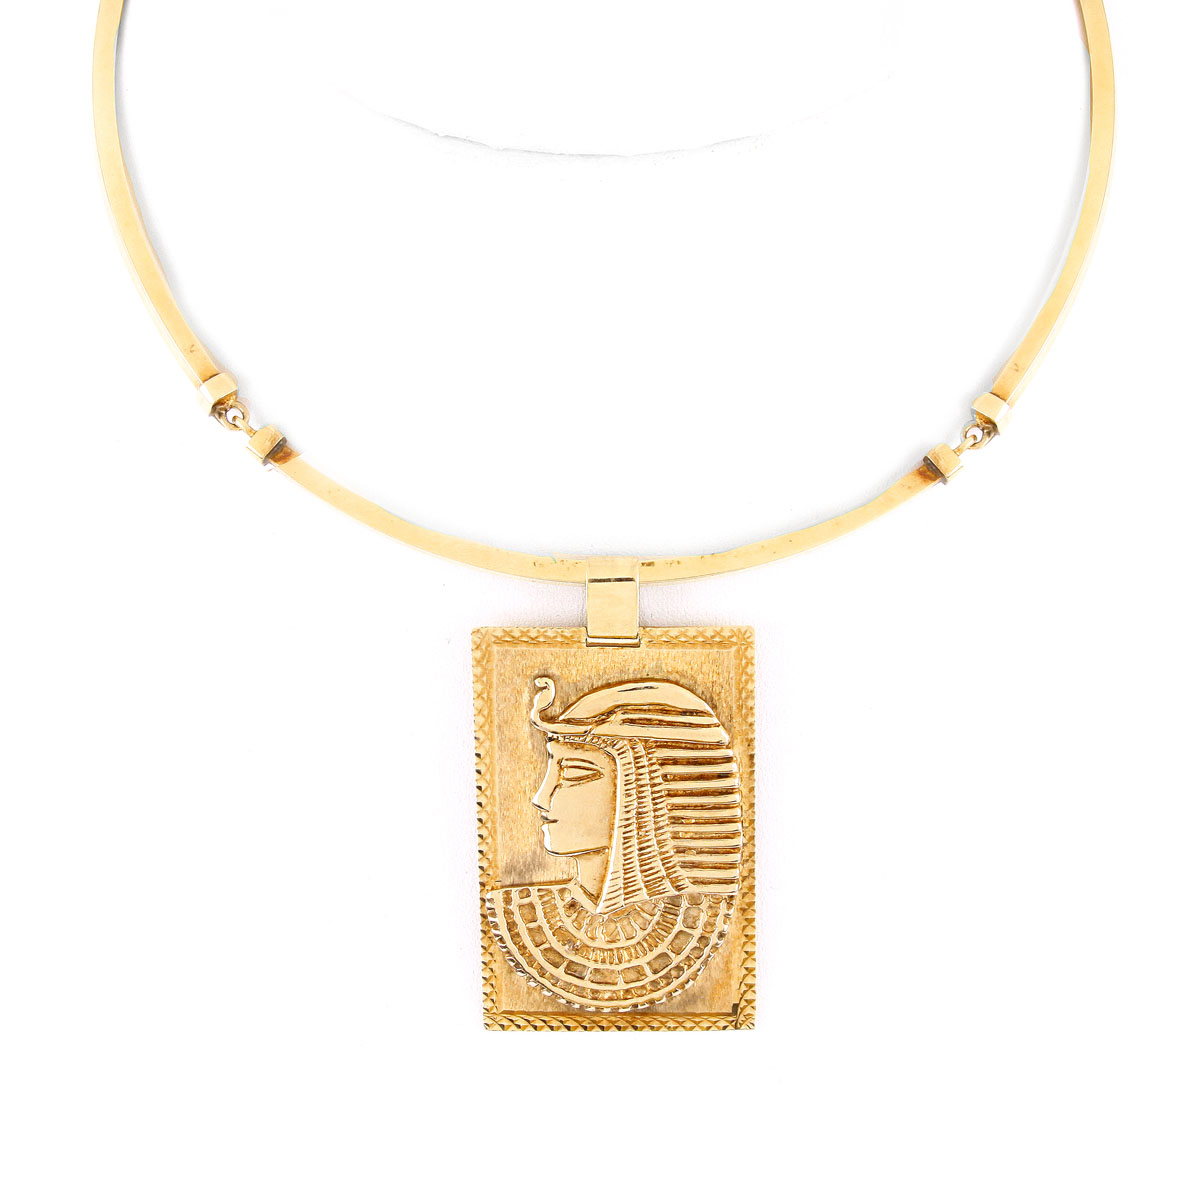 Vintage 14 Karat Yellow Gold "Cleopatra" Pendant Necklace. Stamped (rubbed) 14K.